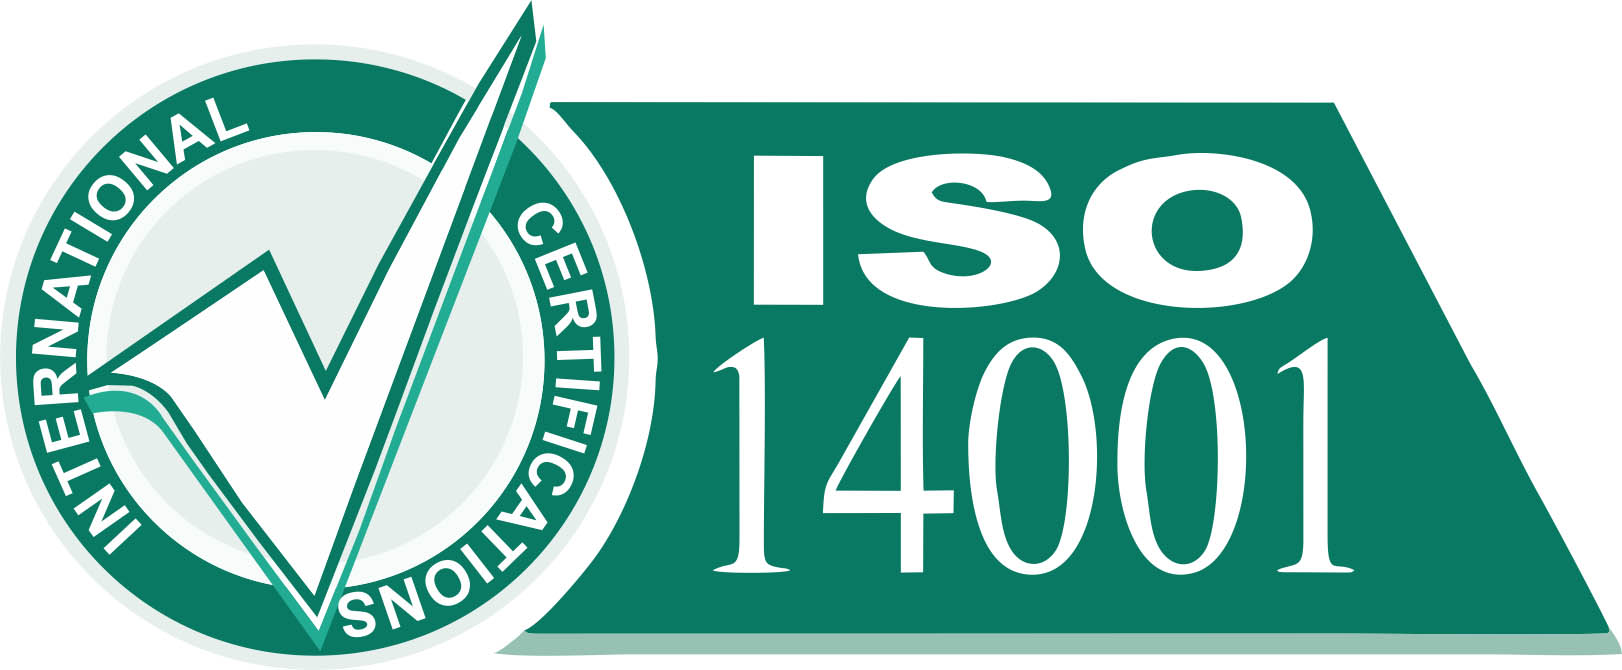 PCMB iso 14001